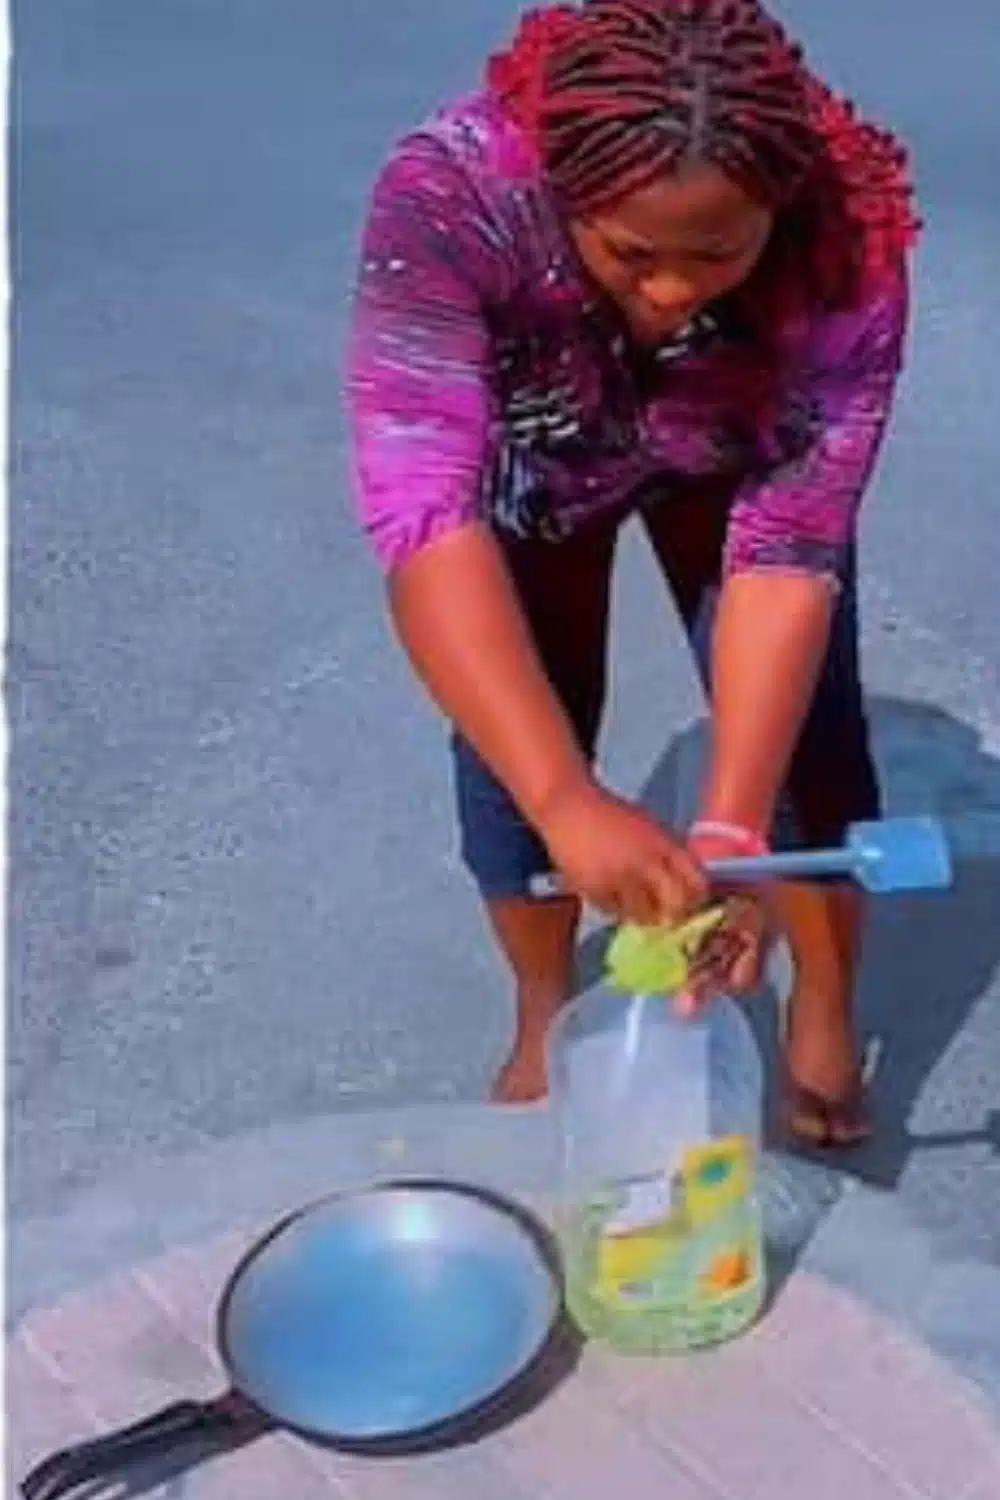 Moment Dubai-based lady uses hot sun to fry eggs goes viral (Video)